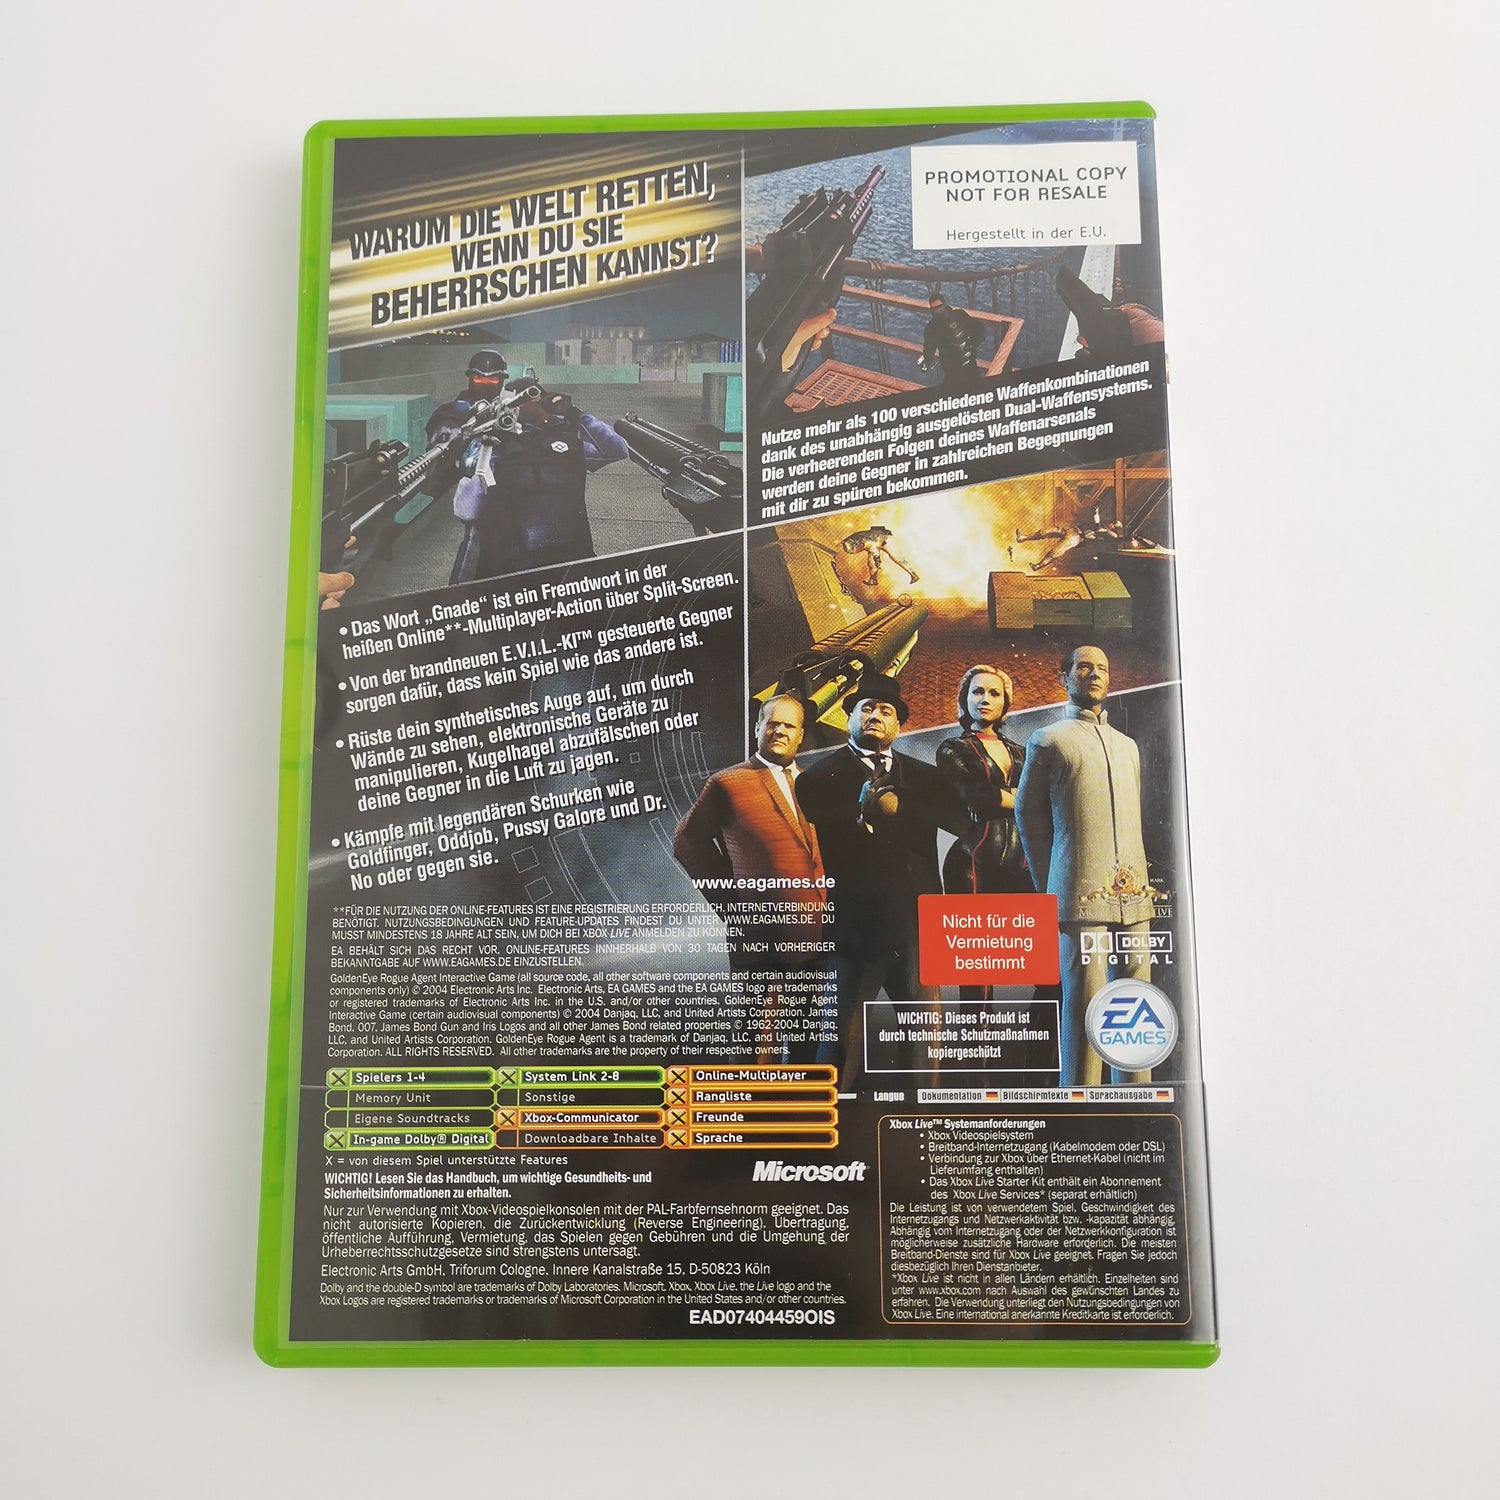 Microsoft Xbox Classic Goldeneye Rogue Agent - Promotional Copy Not for Resale